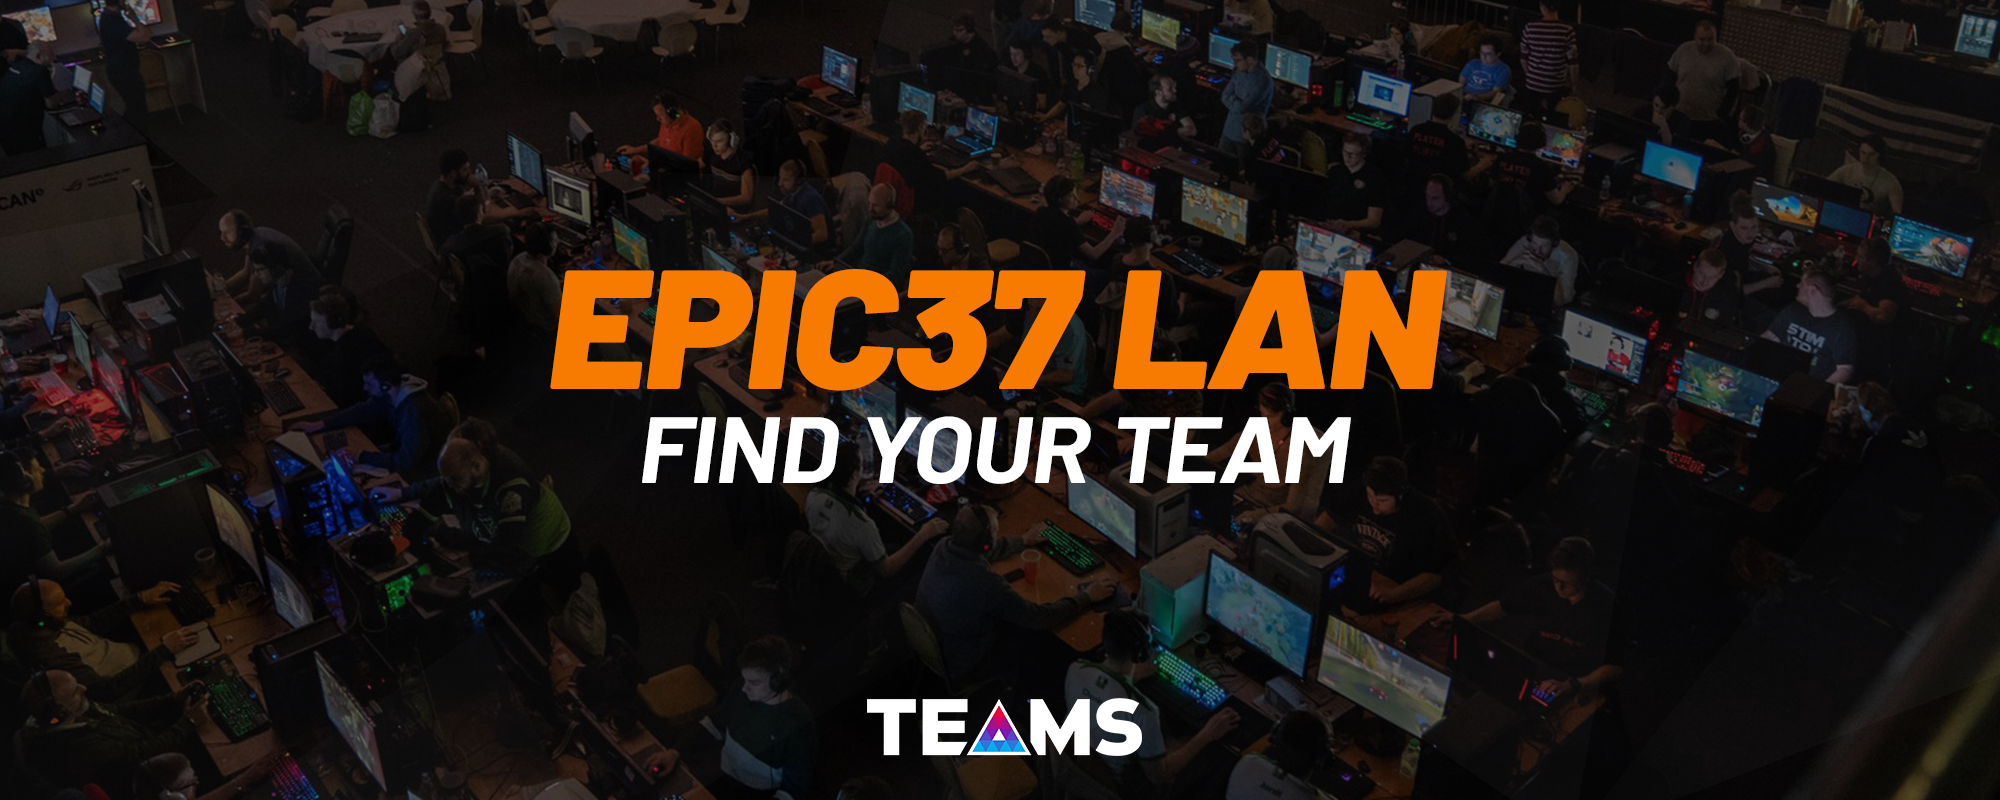 Looking for an EPIC37 Team or that final player to complete the line-up?